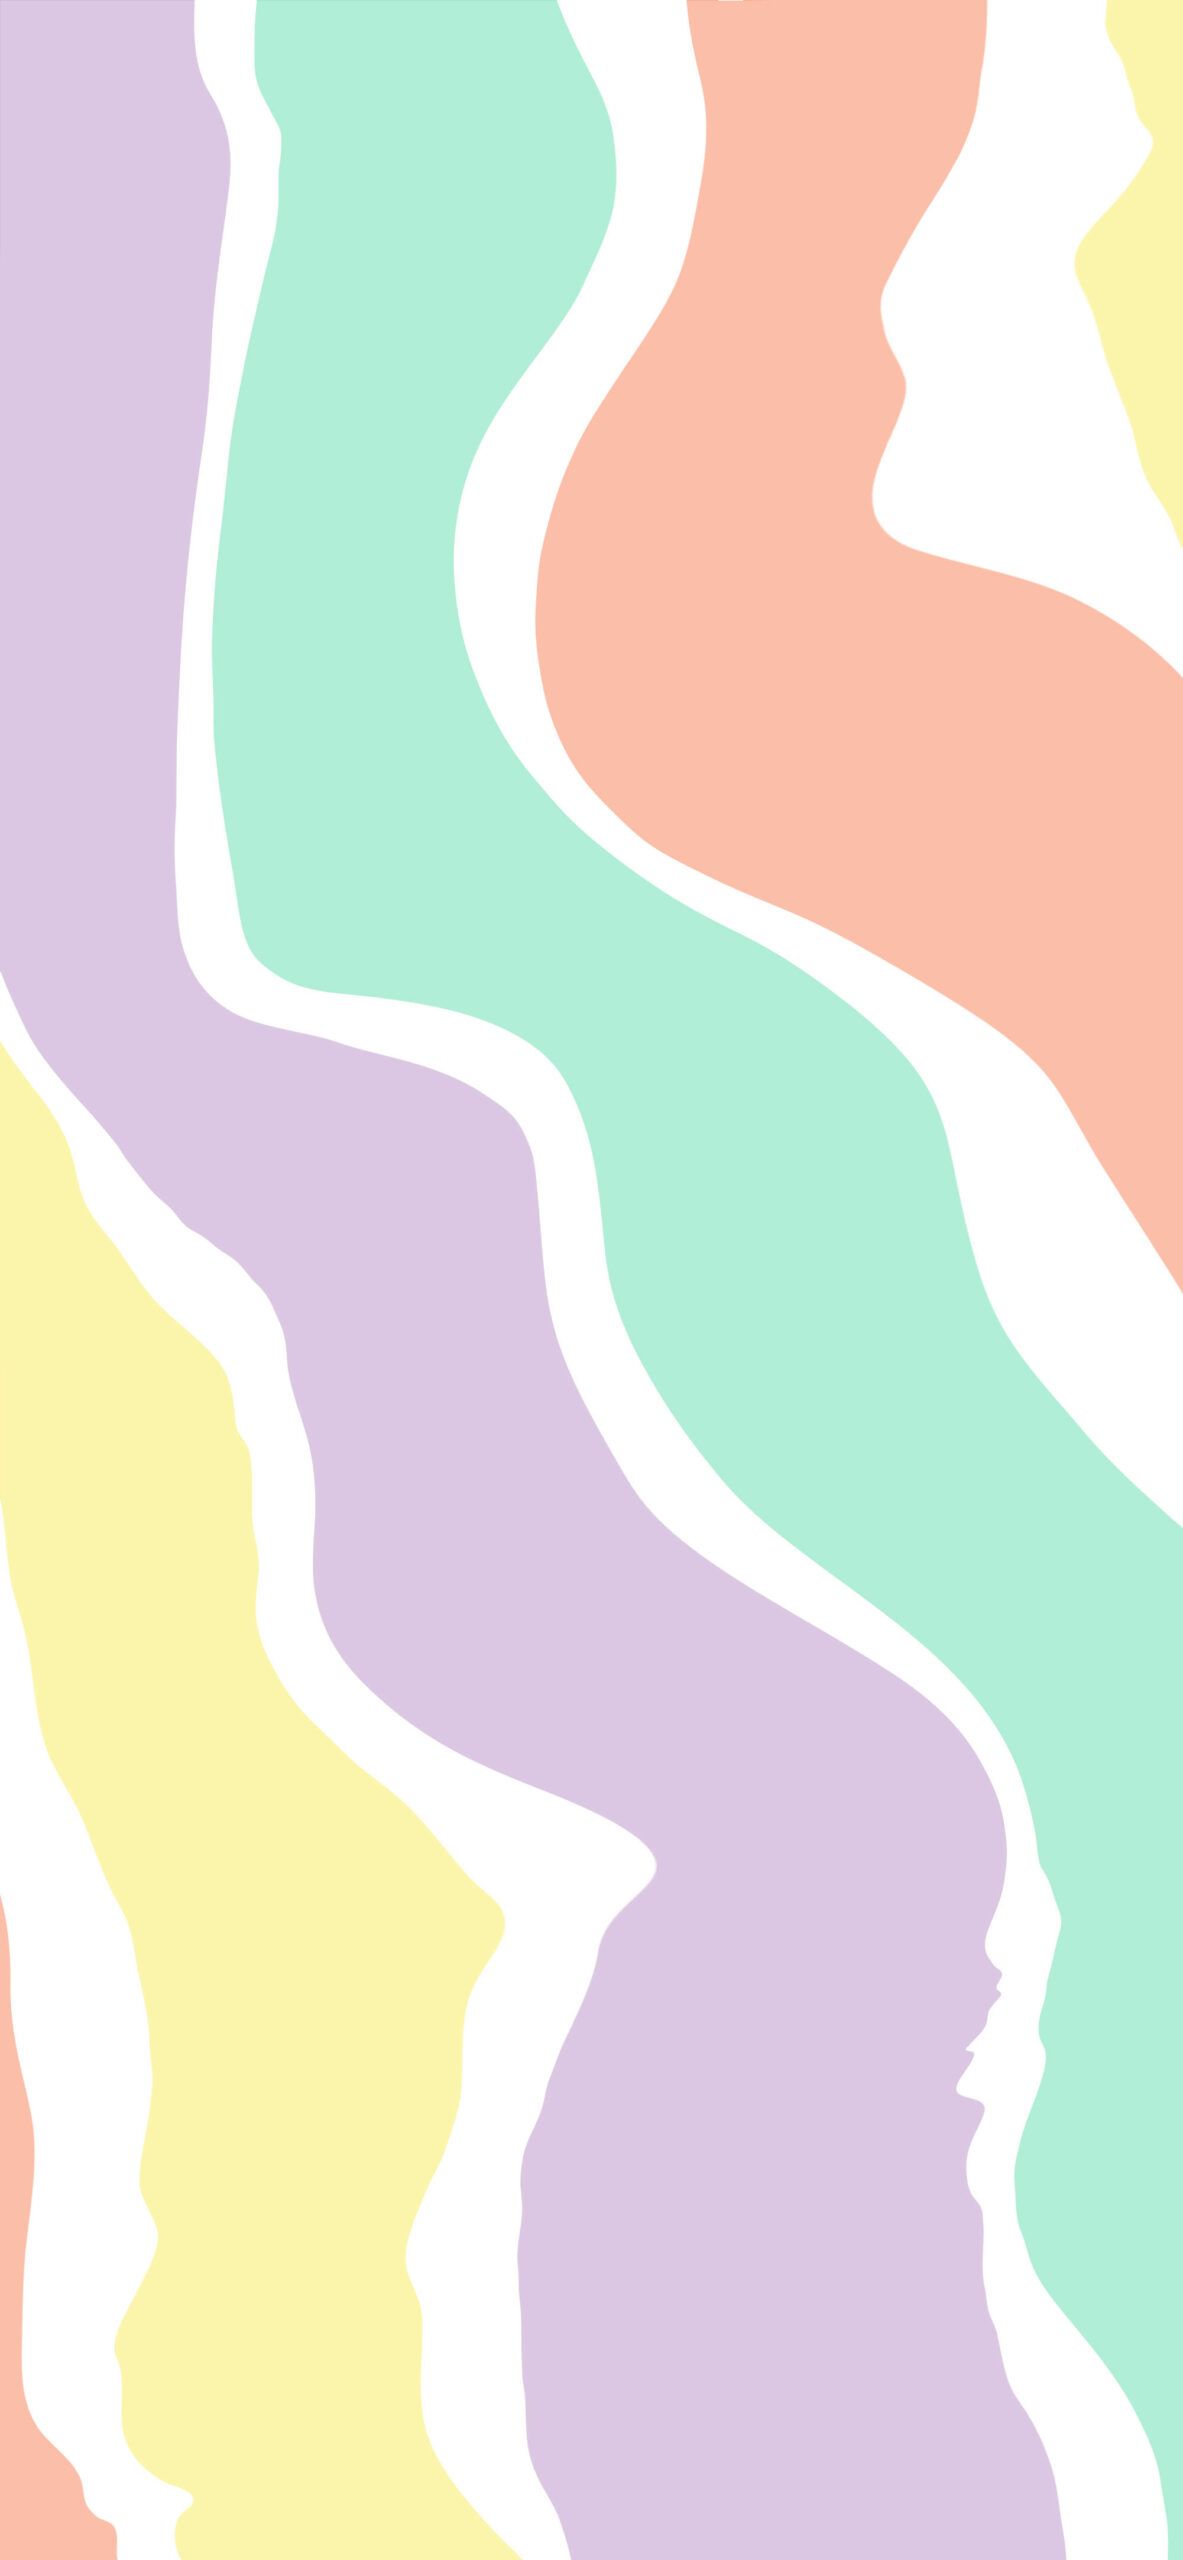 A colorful abstract pattern with wavy lines - Pastel, pastel minimalist